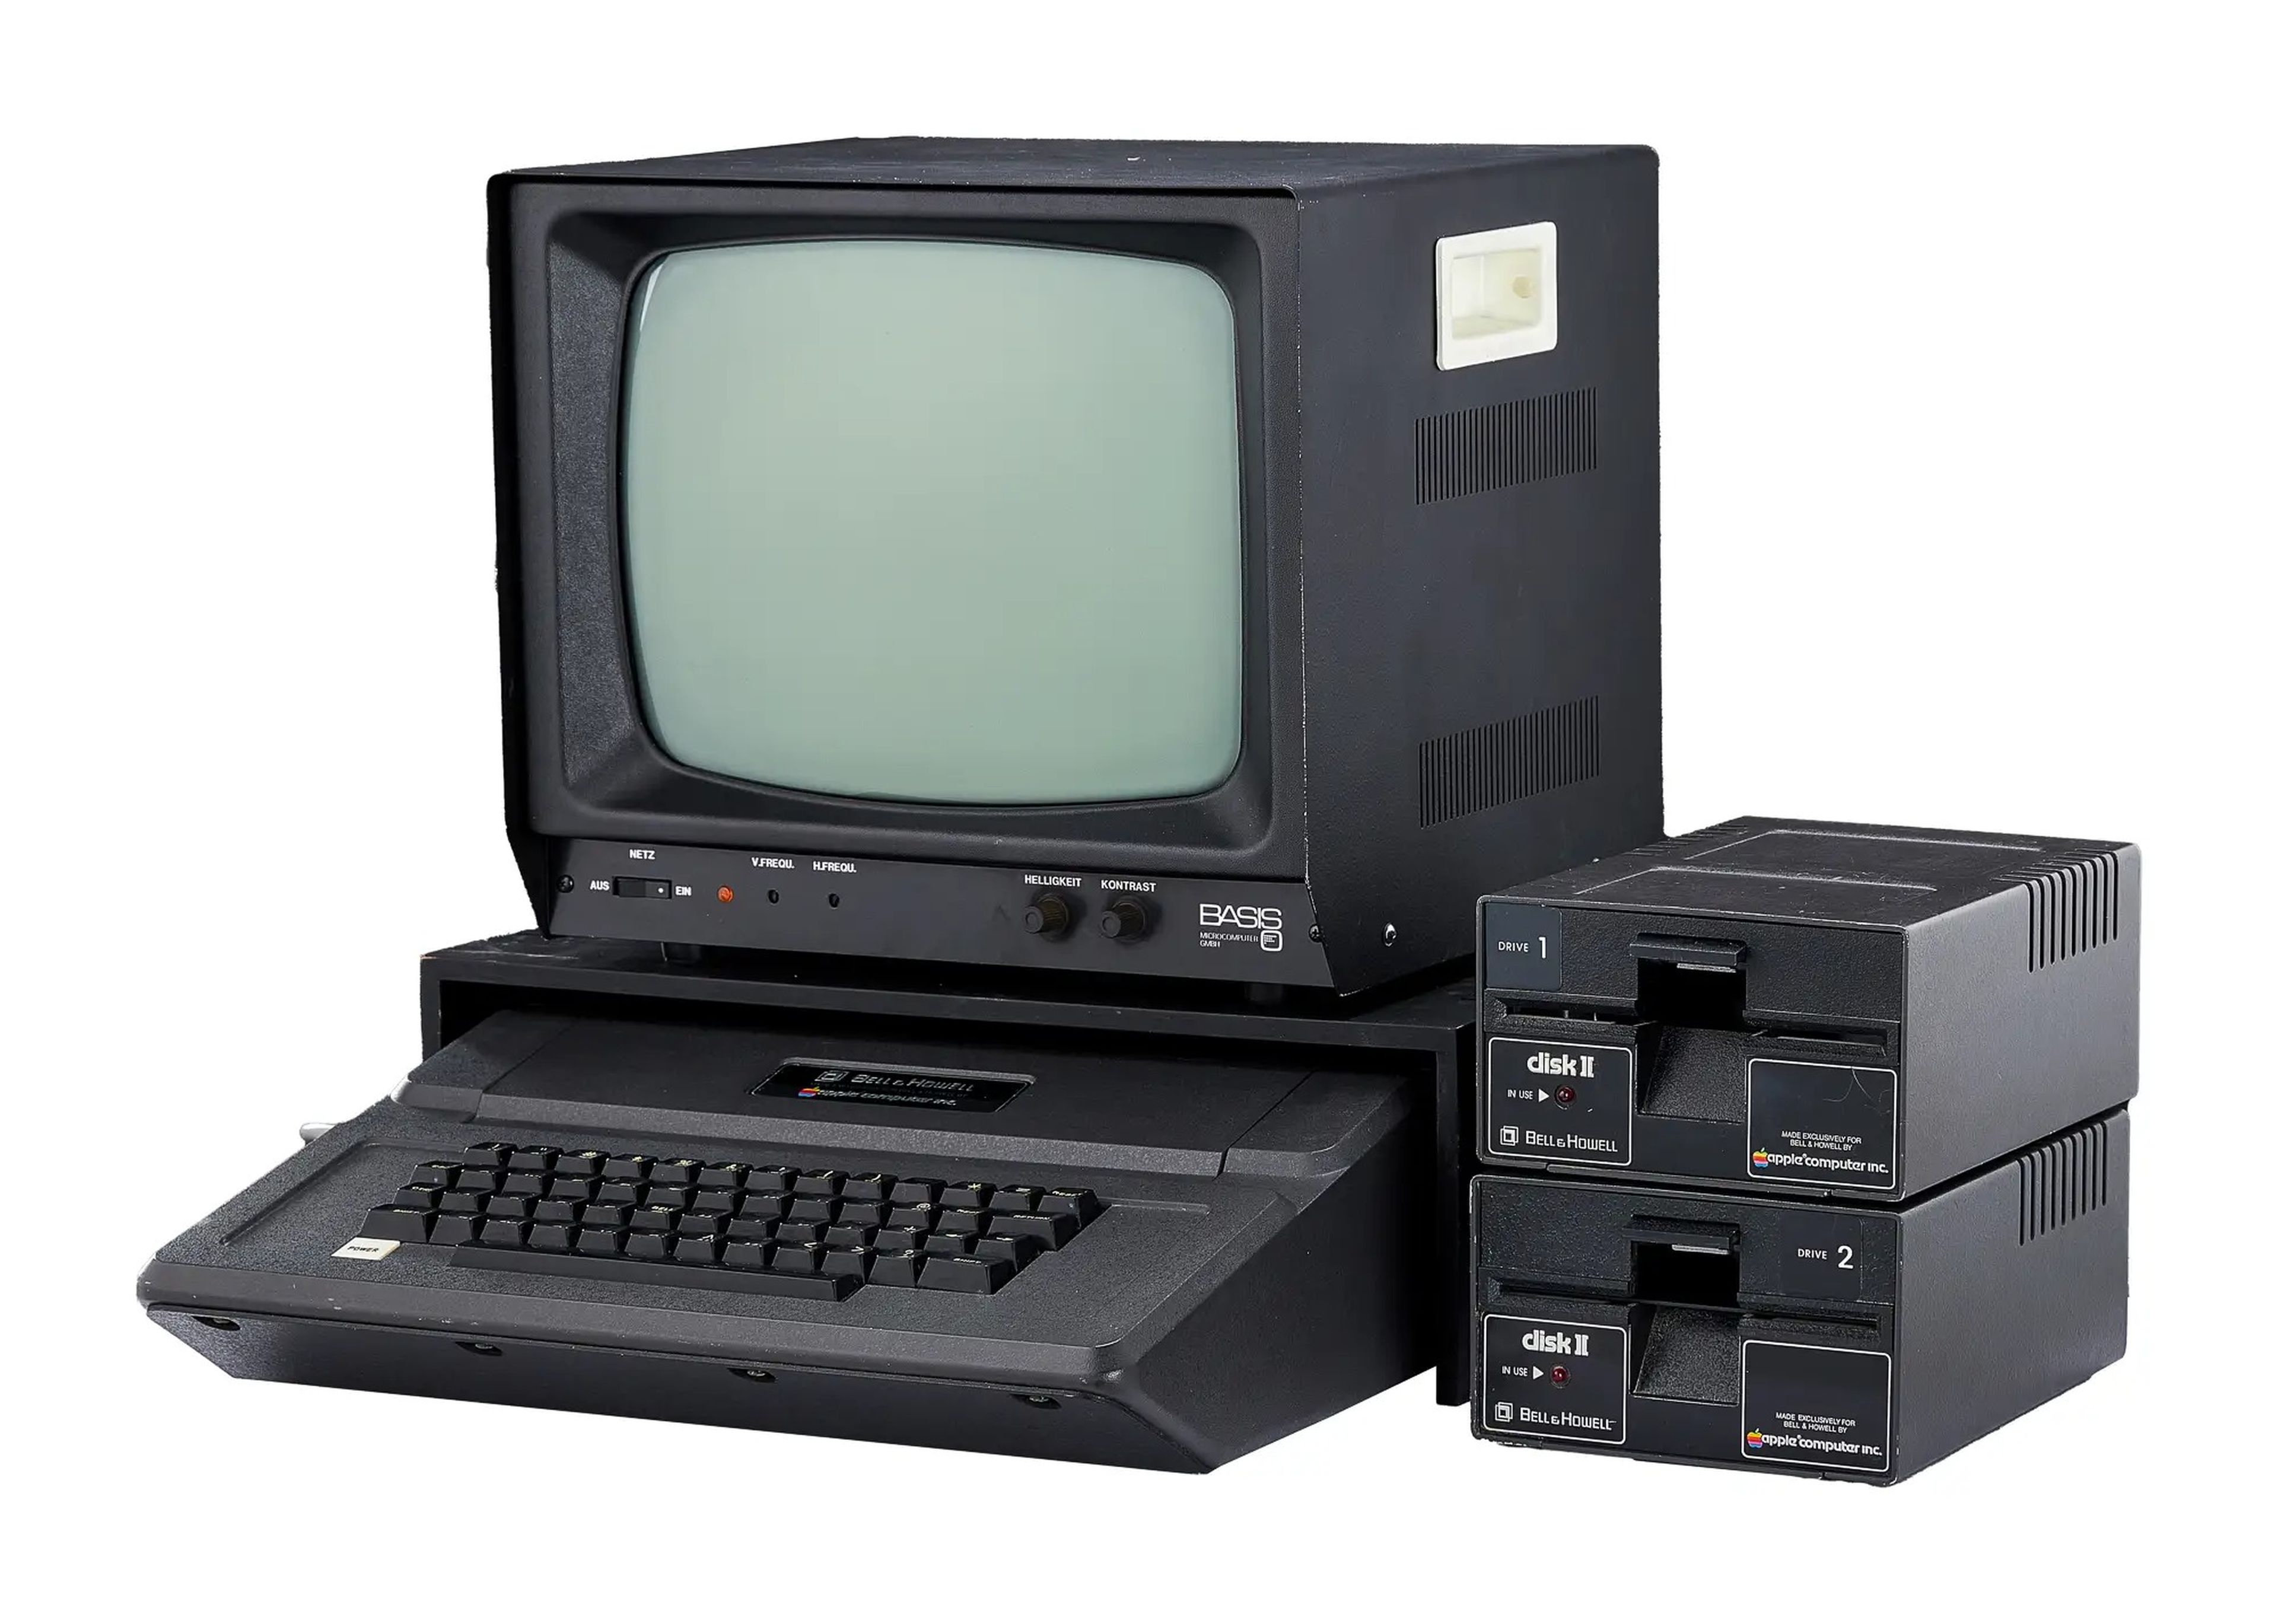 1979 Bell & Howell "Apple II Plus" computer with a green screen monitor and two drives next to it